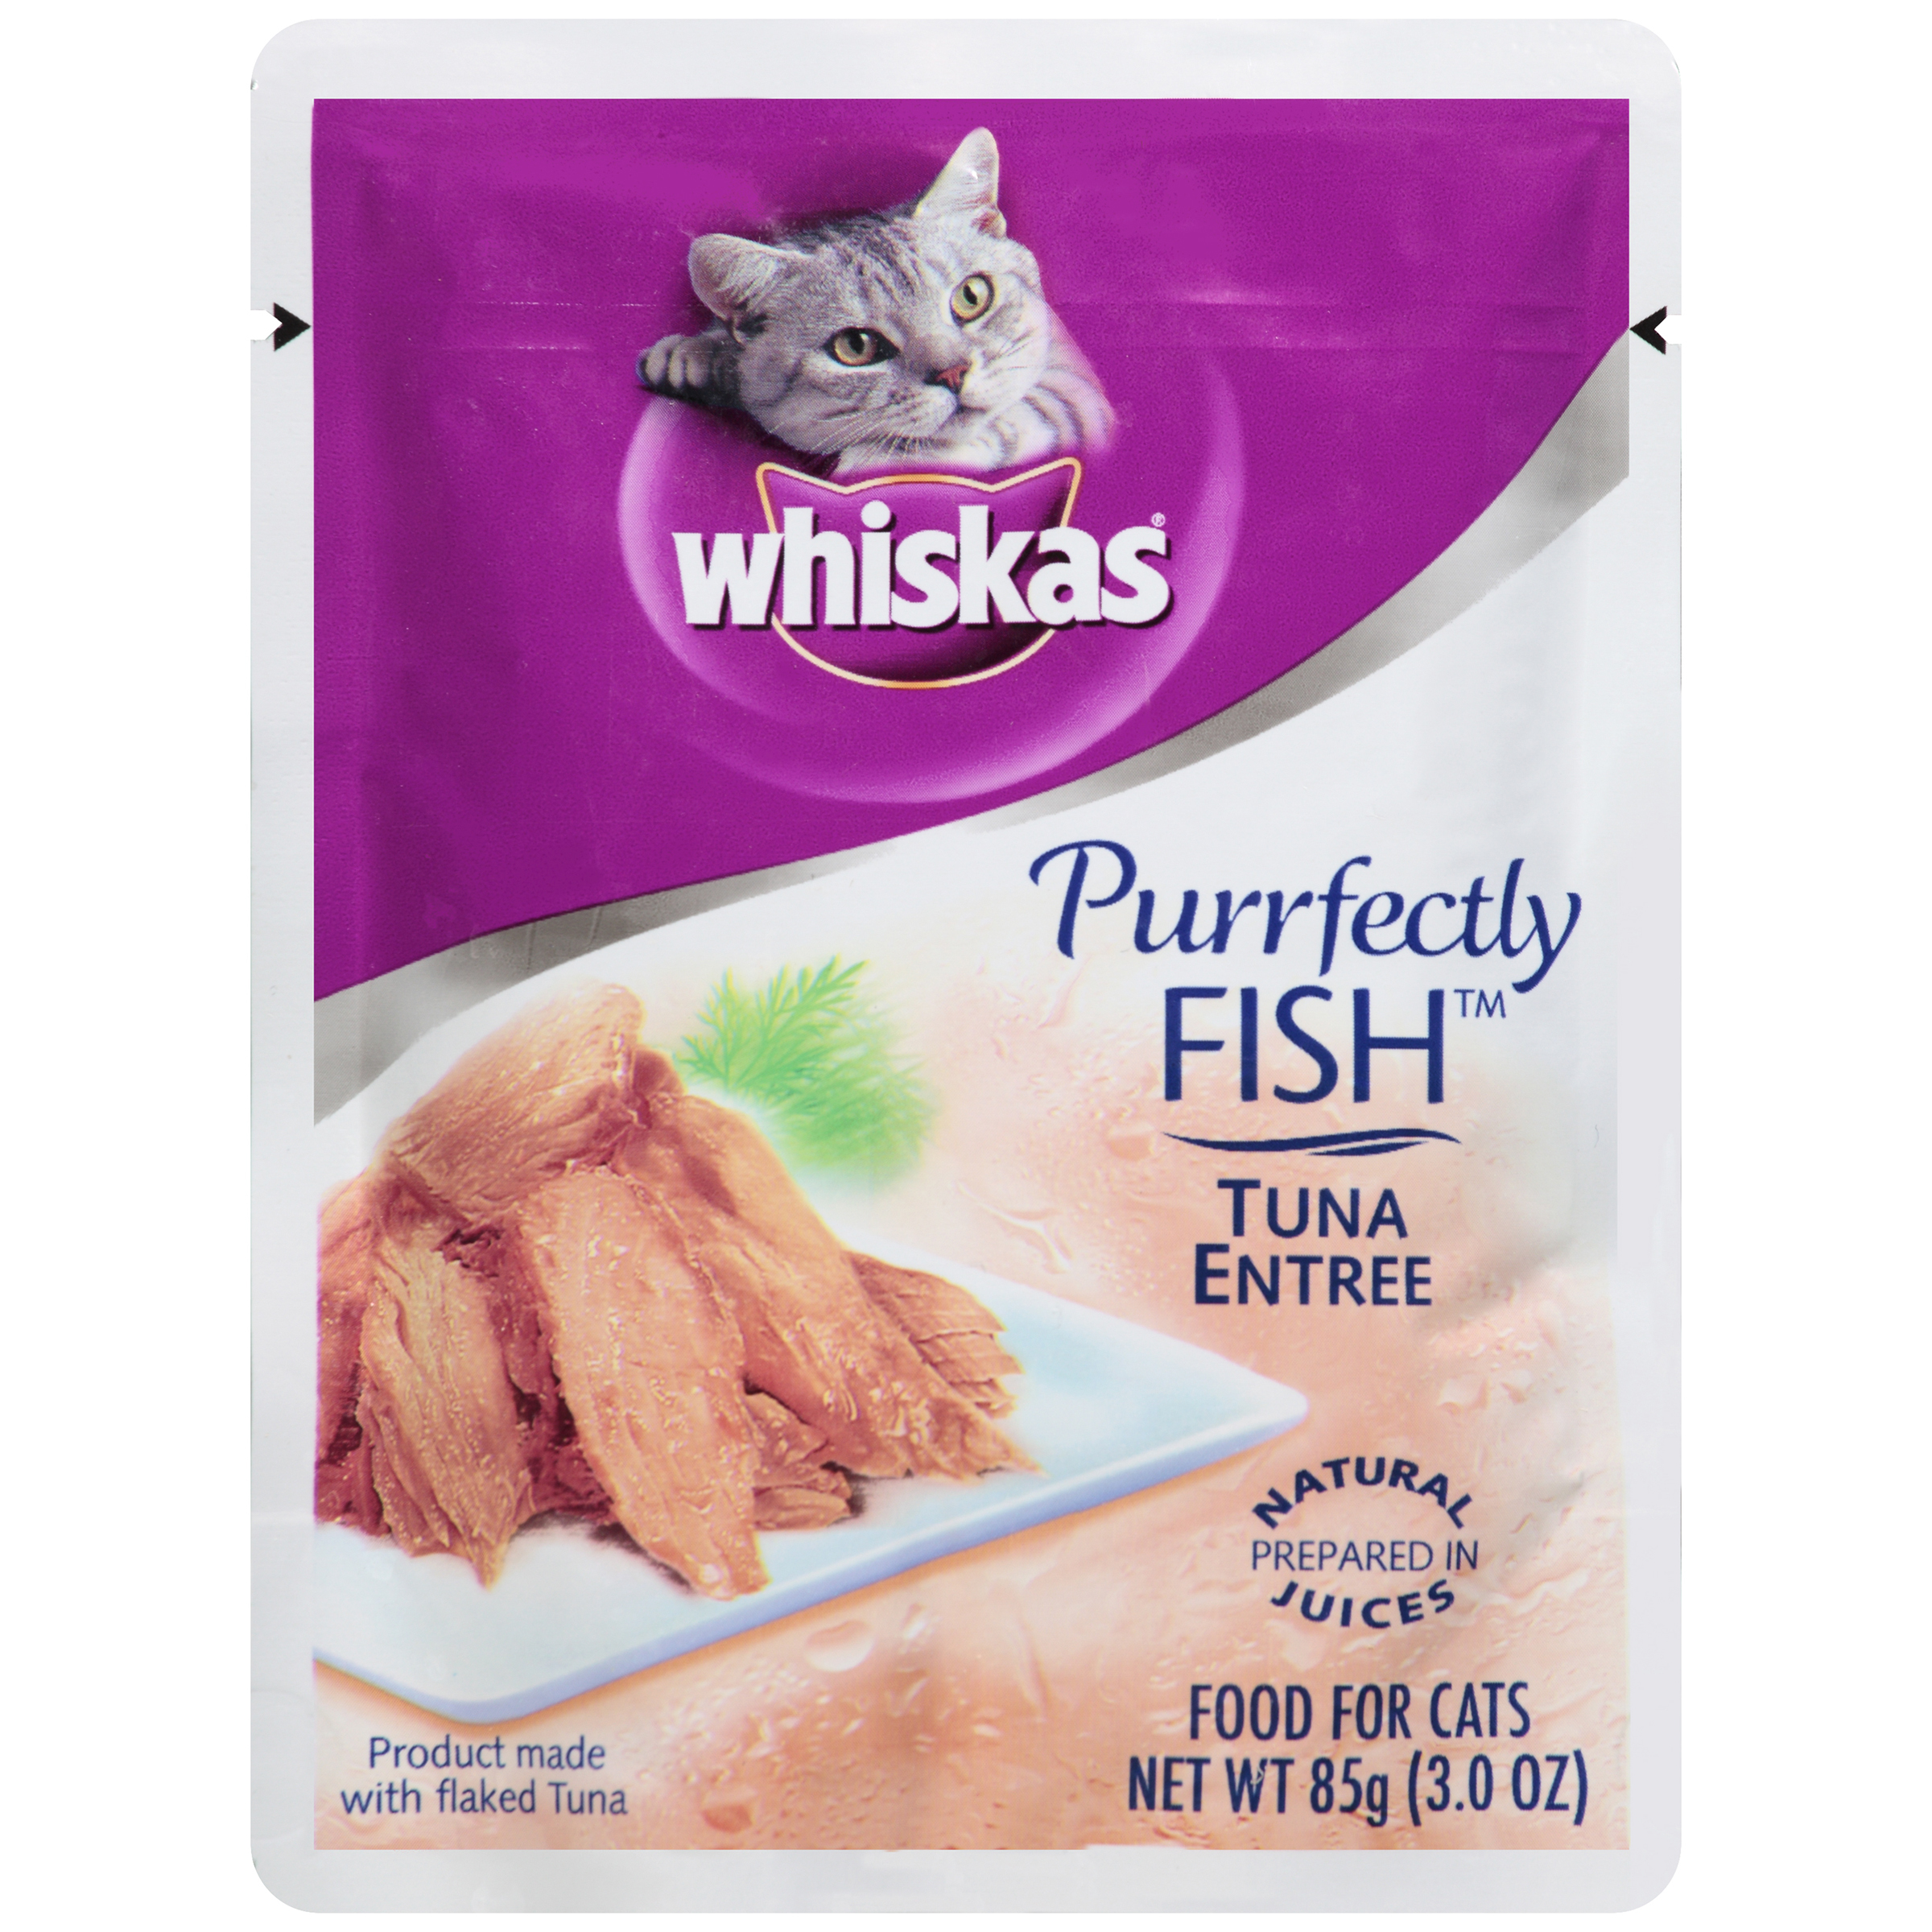 Whiskas Purrfectly Fish Tuna Entree Wet Cat Food 